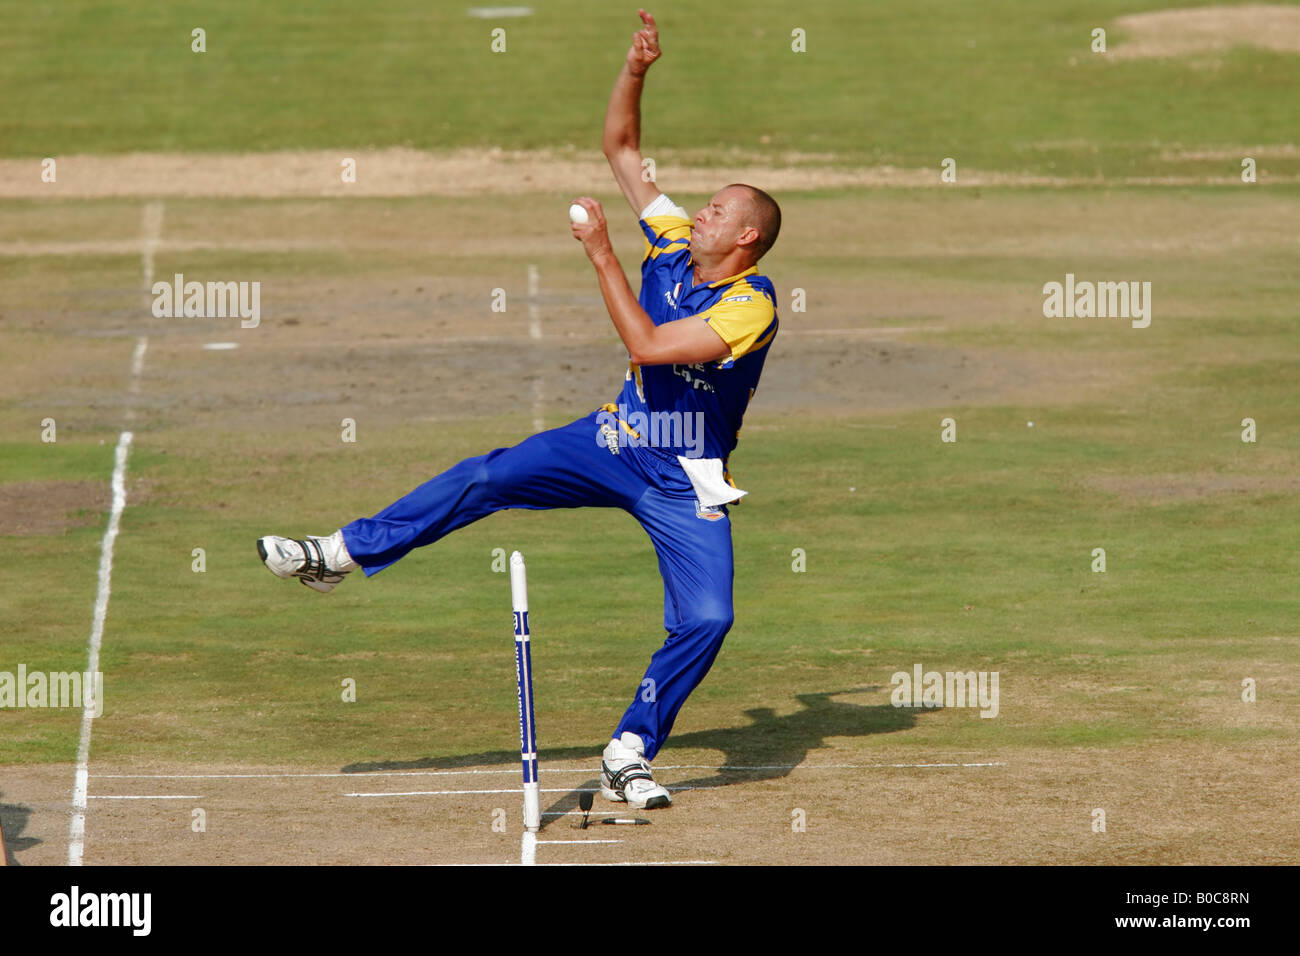 Bowler during a one-day cricket match between the Cape Cobras and Free State Eagles, Bloemfontein, South Africa Stock Photo